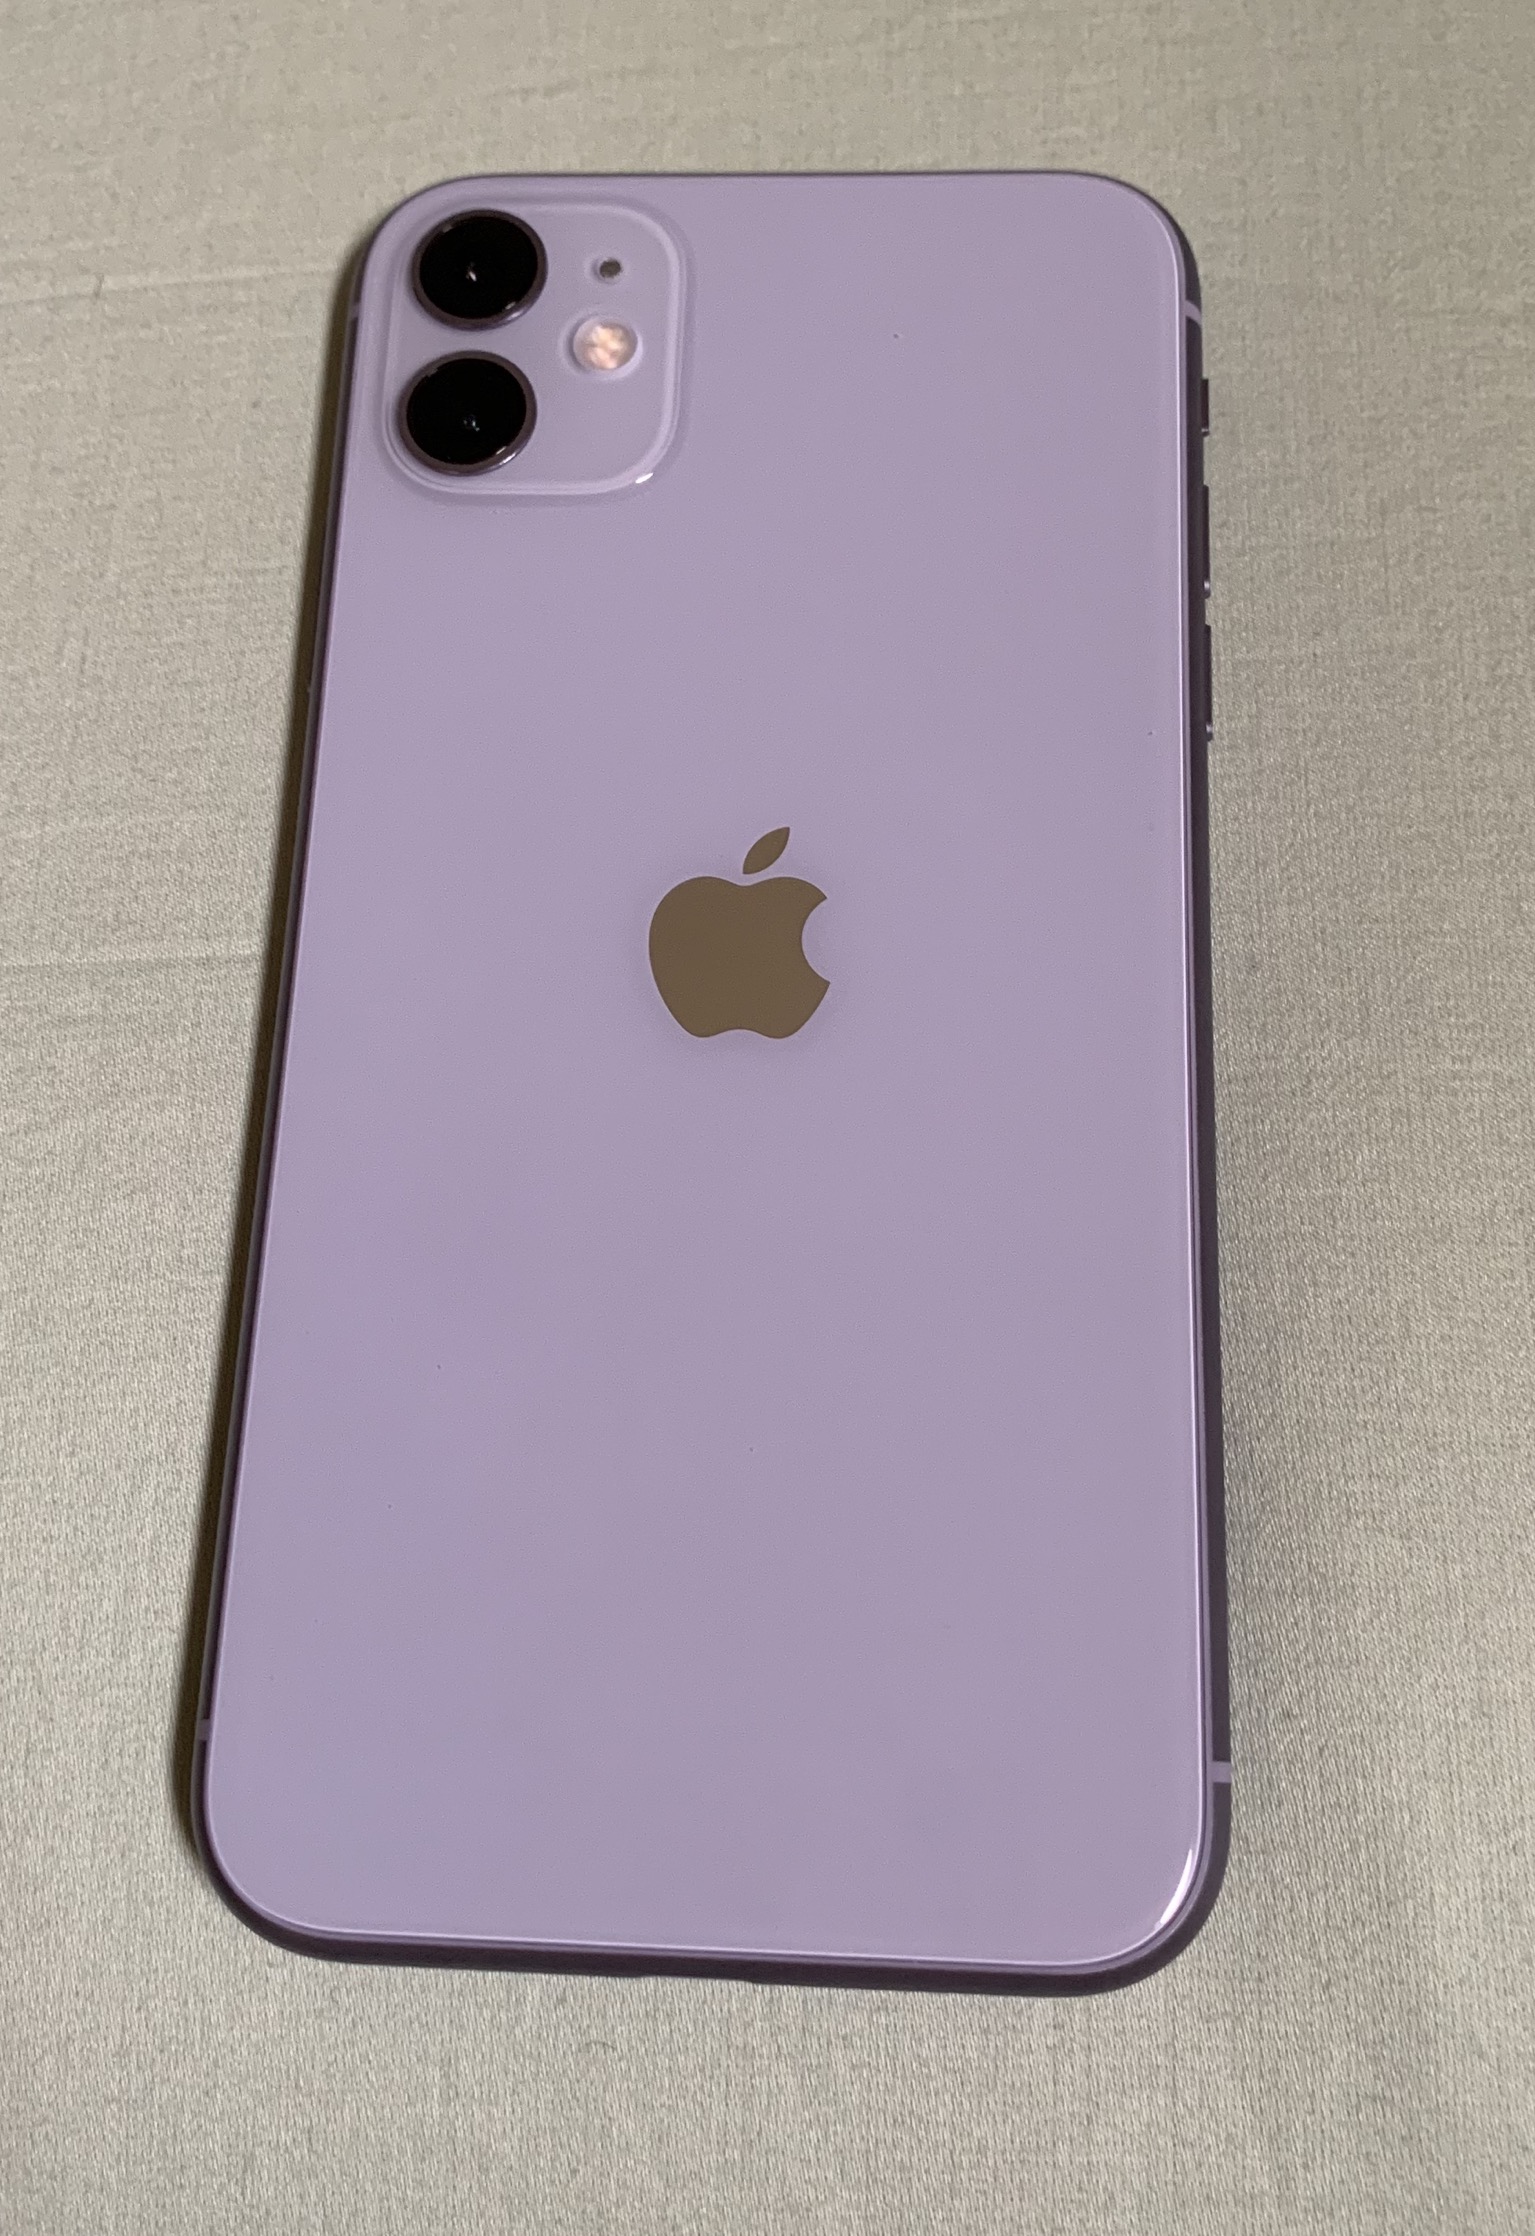 What Color Iphone 11 Are You Getting Page 12 Macrumors Forums